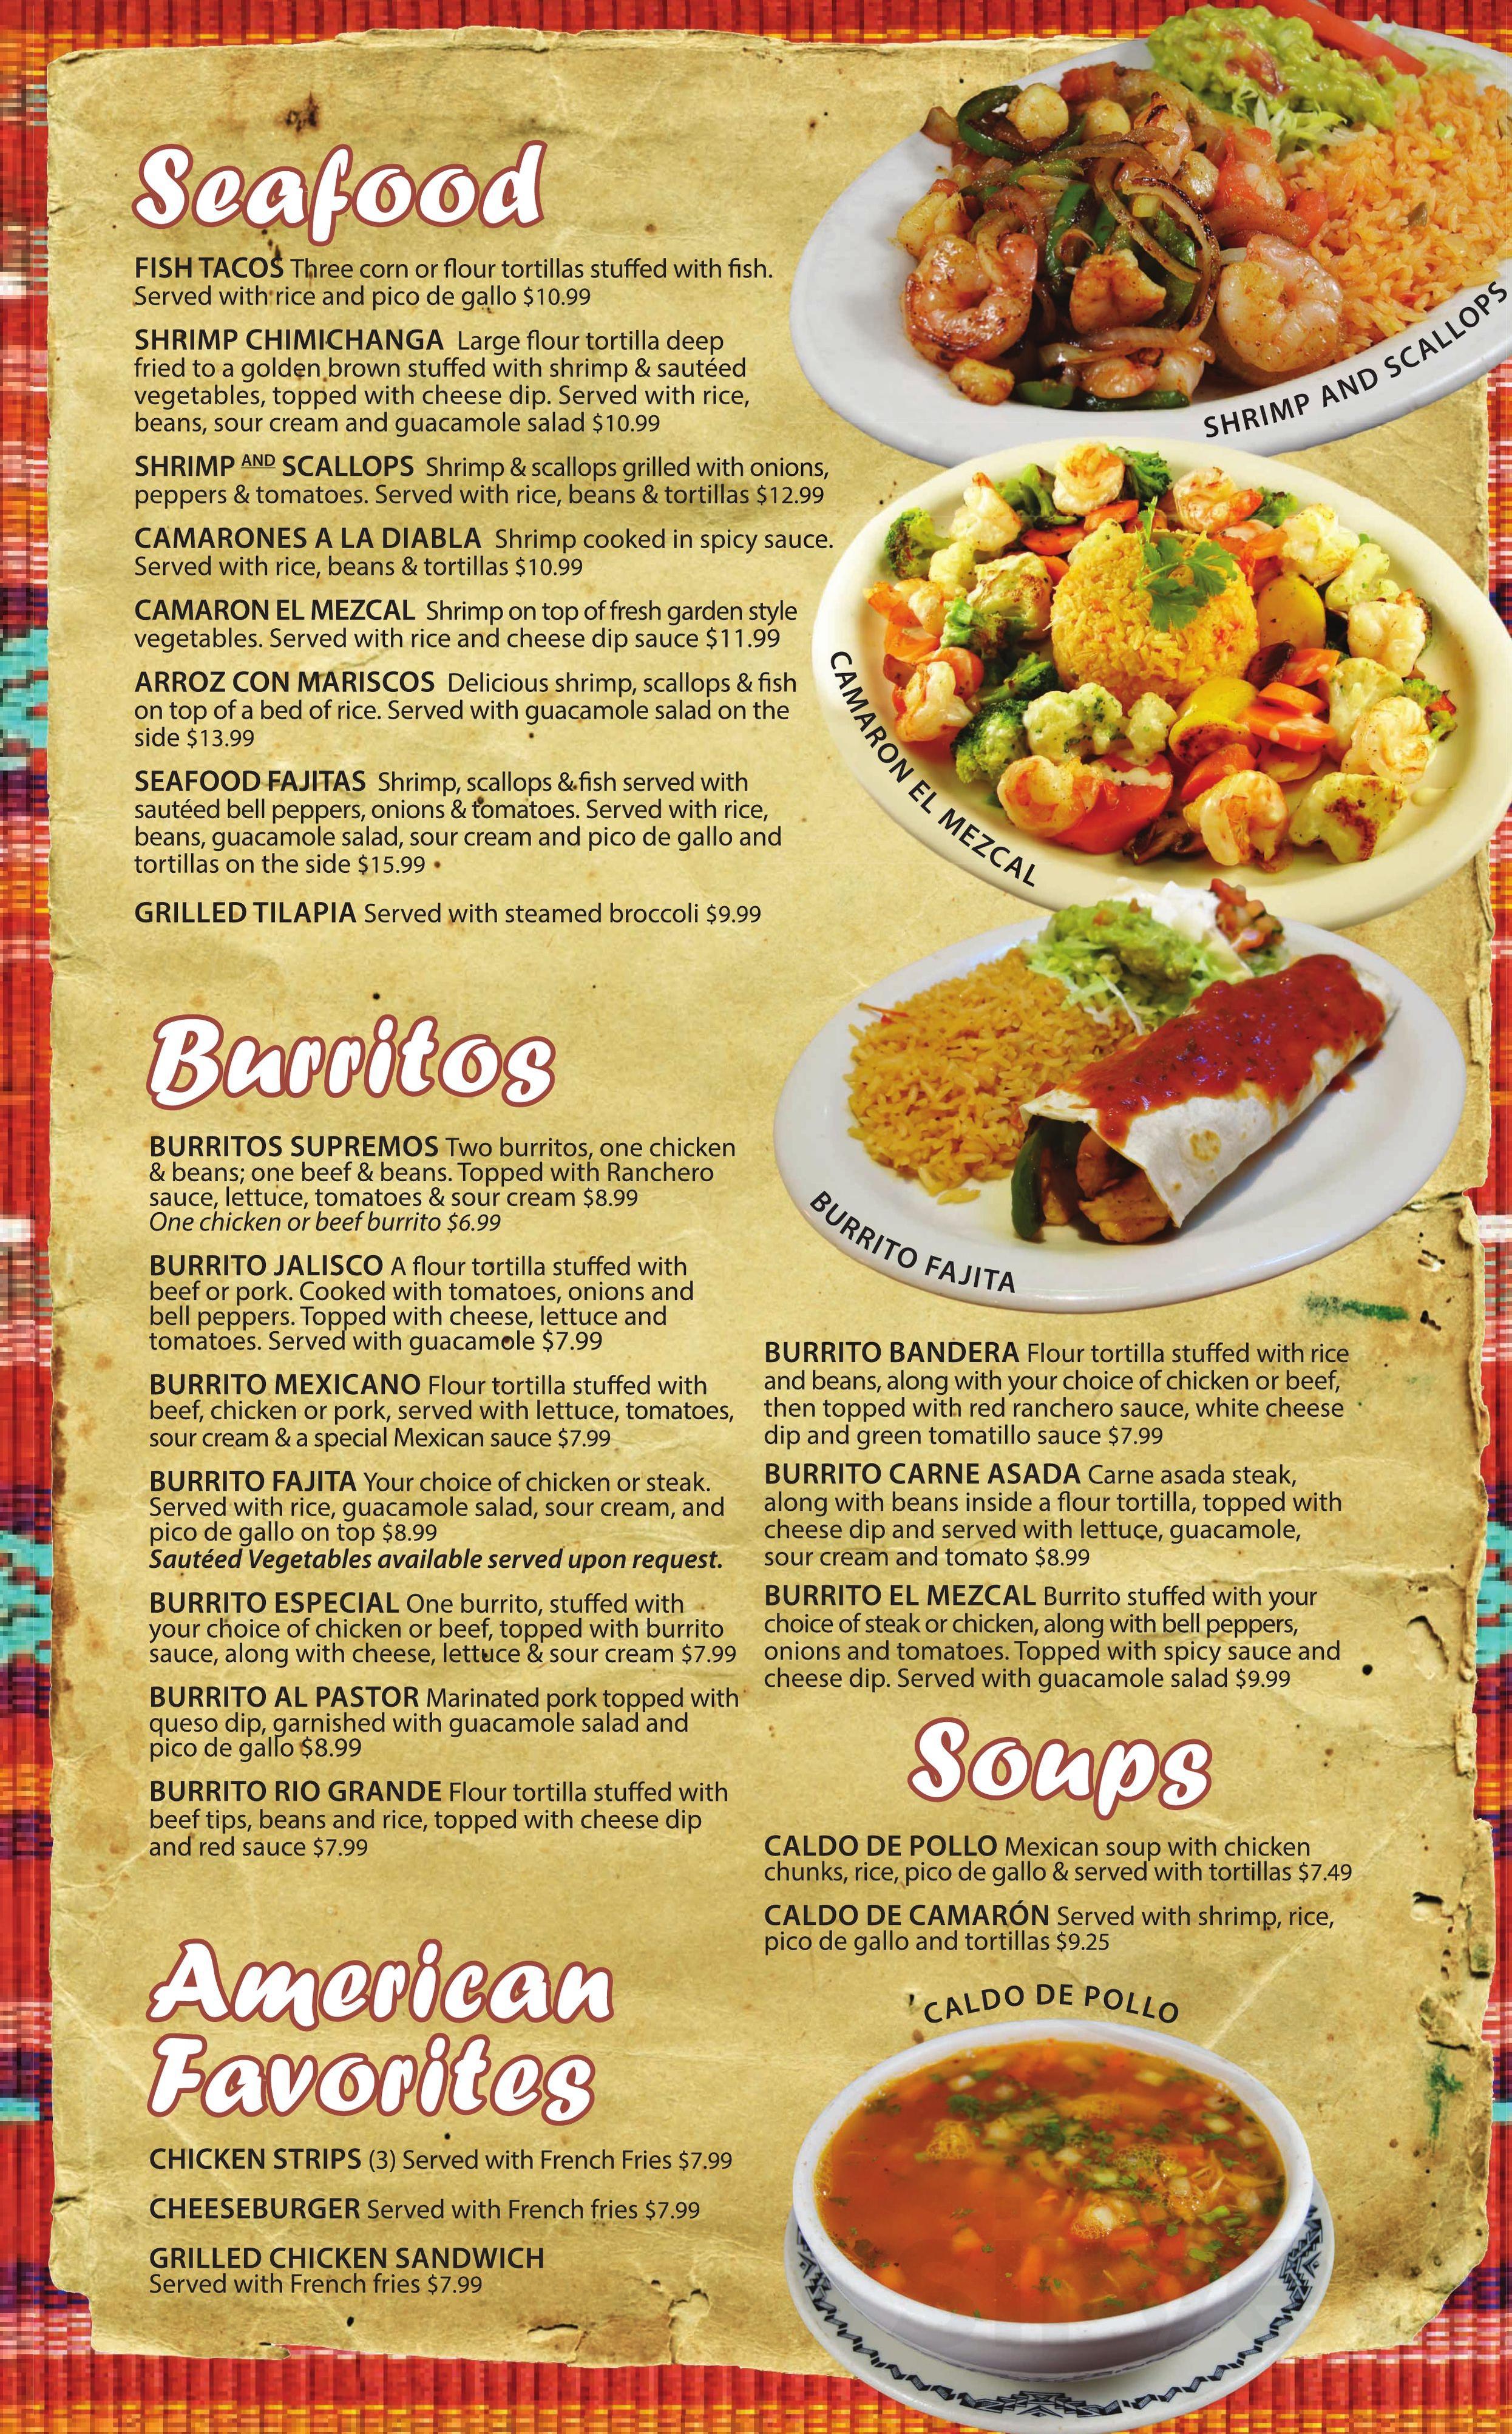 Traditional Mexican Food List